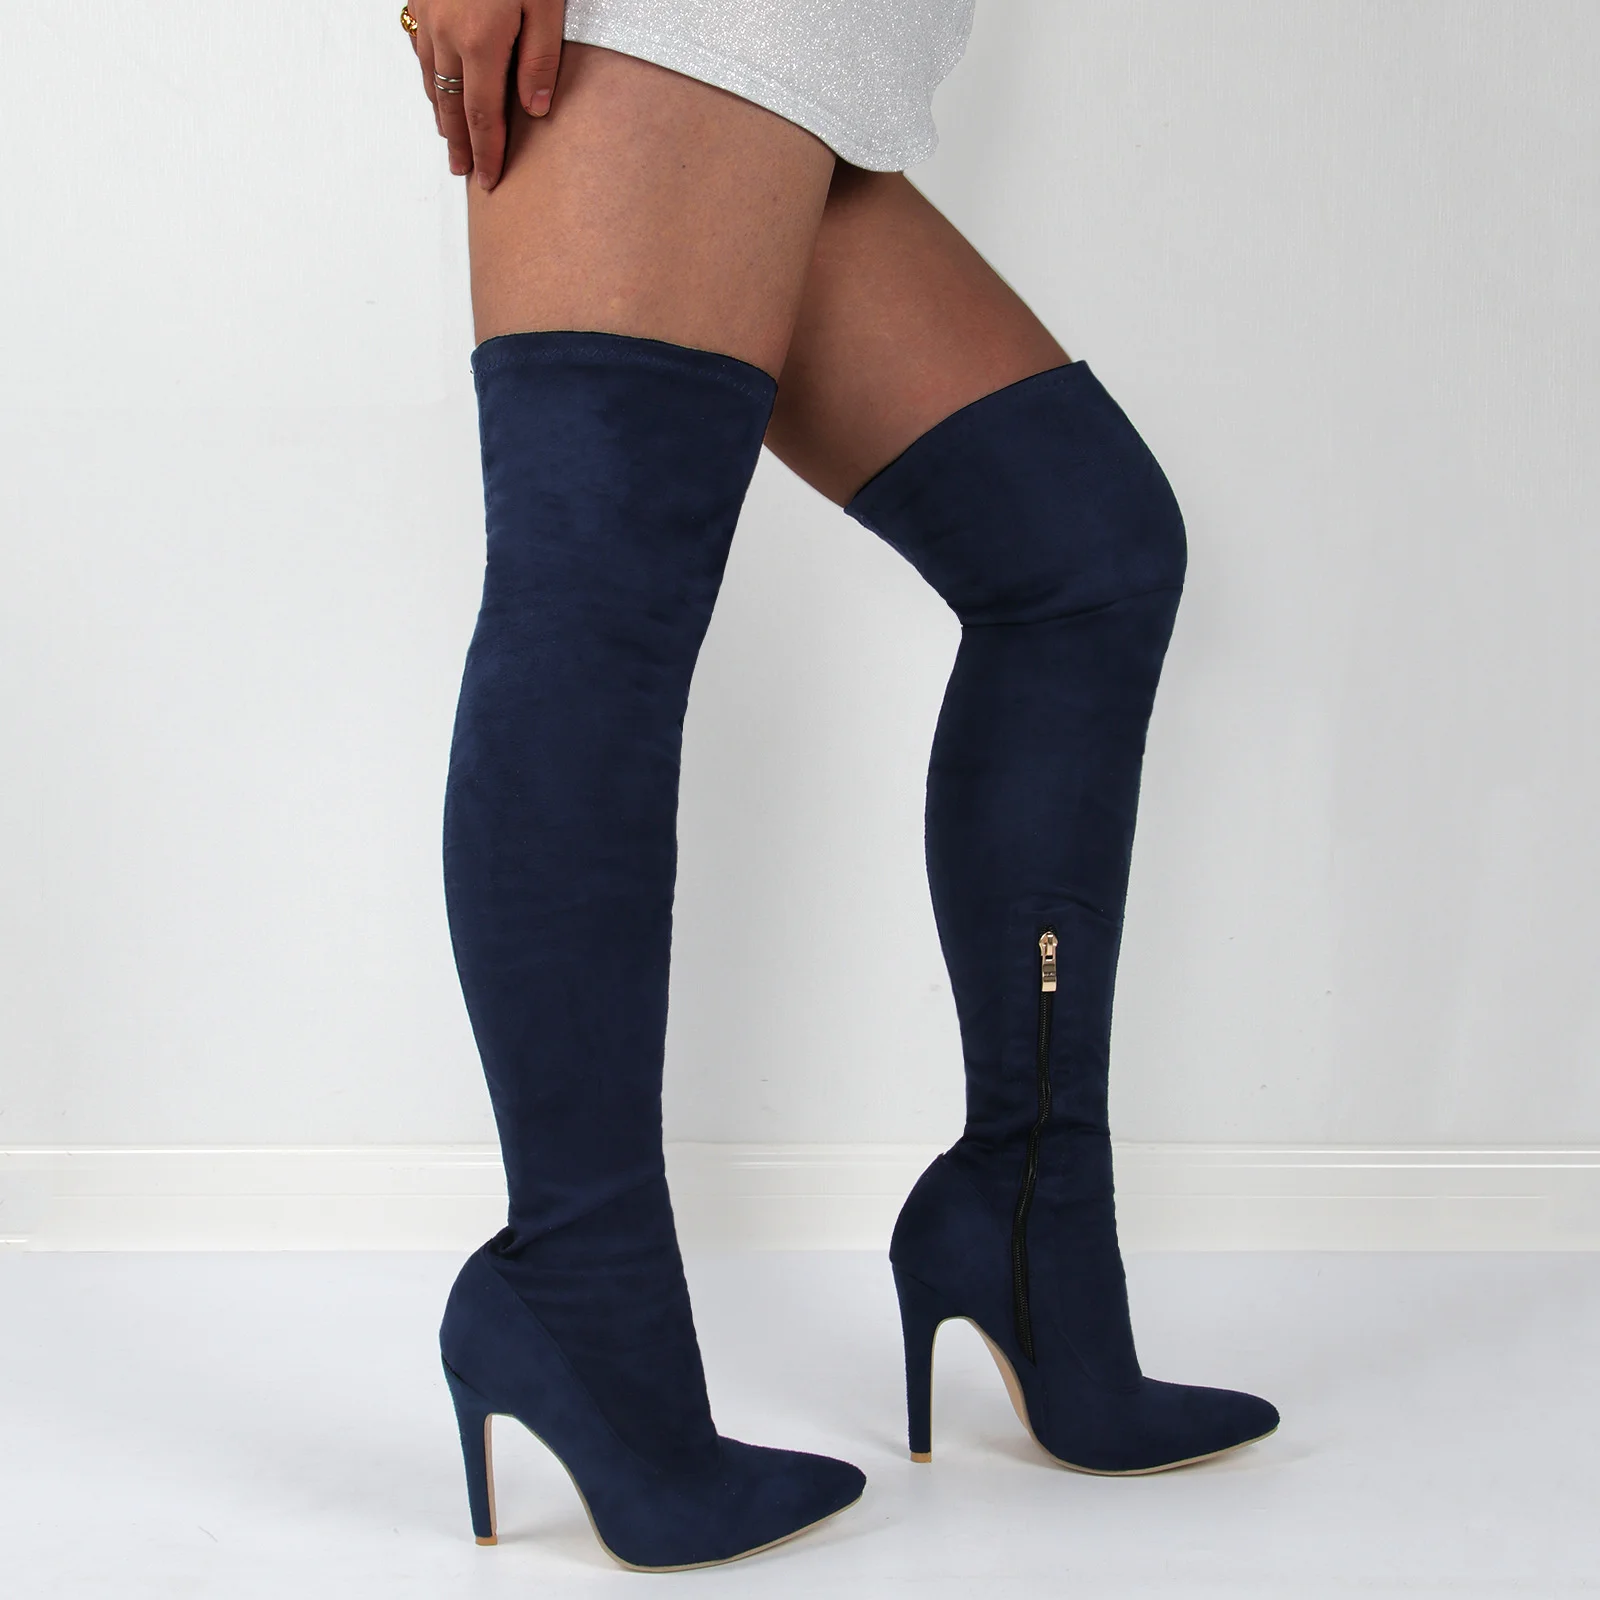 

Women's Thigh Boots Pointed Toe High Heels Elastic Bootas Over The Knee Nubuck Suede Long Booties Autumn Winter Party Nightclub